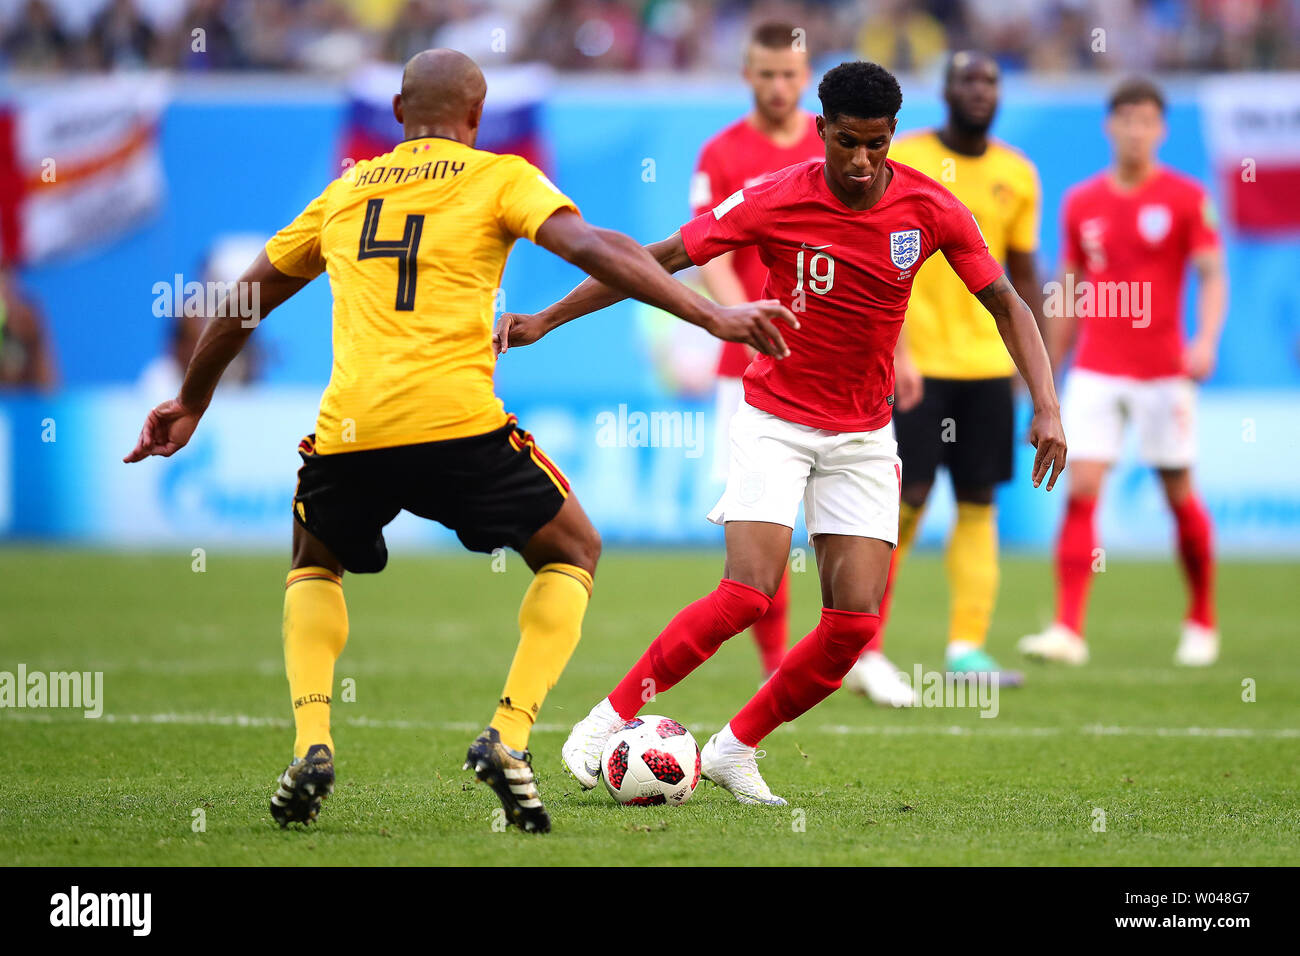 Vincent Kompany (L) of Belgium competes for the ball with Marcus Rashford of England during the 2018 FIFA World Cup third place play-off match at the Saint Petersburg Stadium in Saint Petersburg, Russia on July 14, 2018. Belgium beat England 2-0 to finish third. Photo by Chris Brunskill/UPI Stock Photo